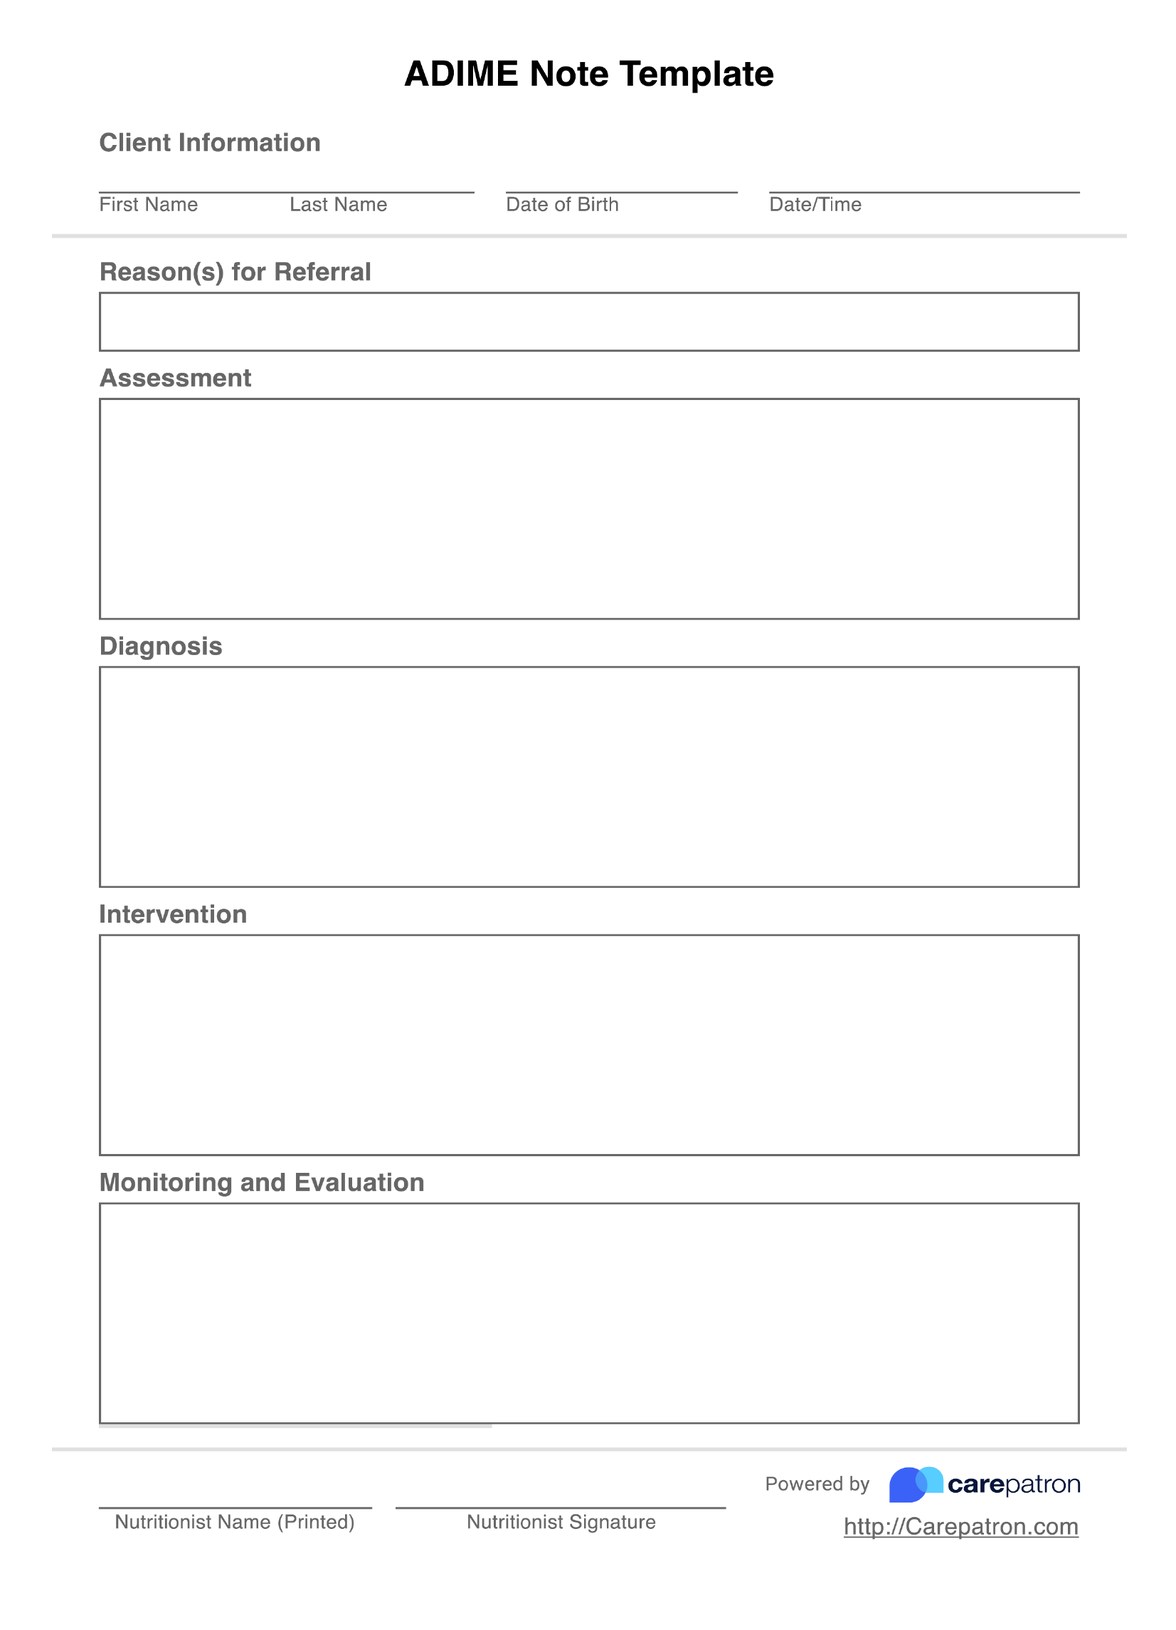 ADIME Note Template PDF Example